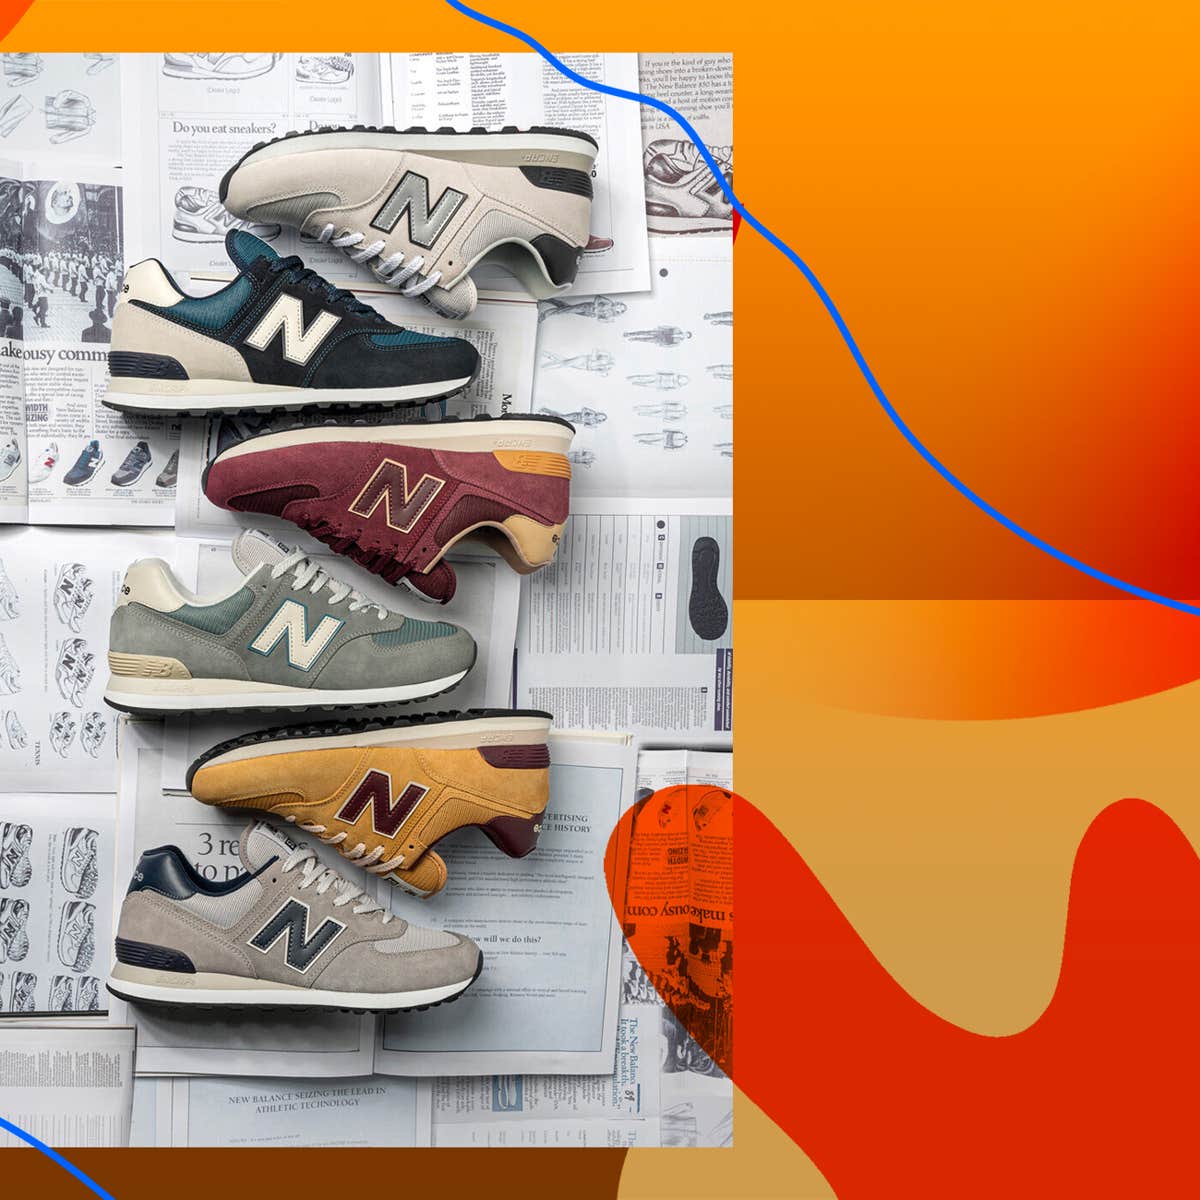 The Best New Balance Sneakers According To User